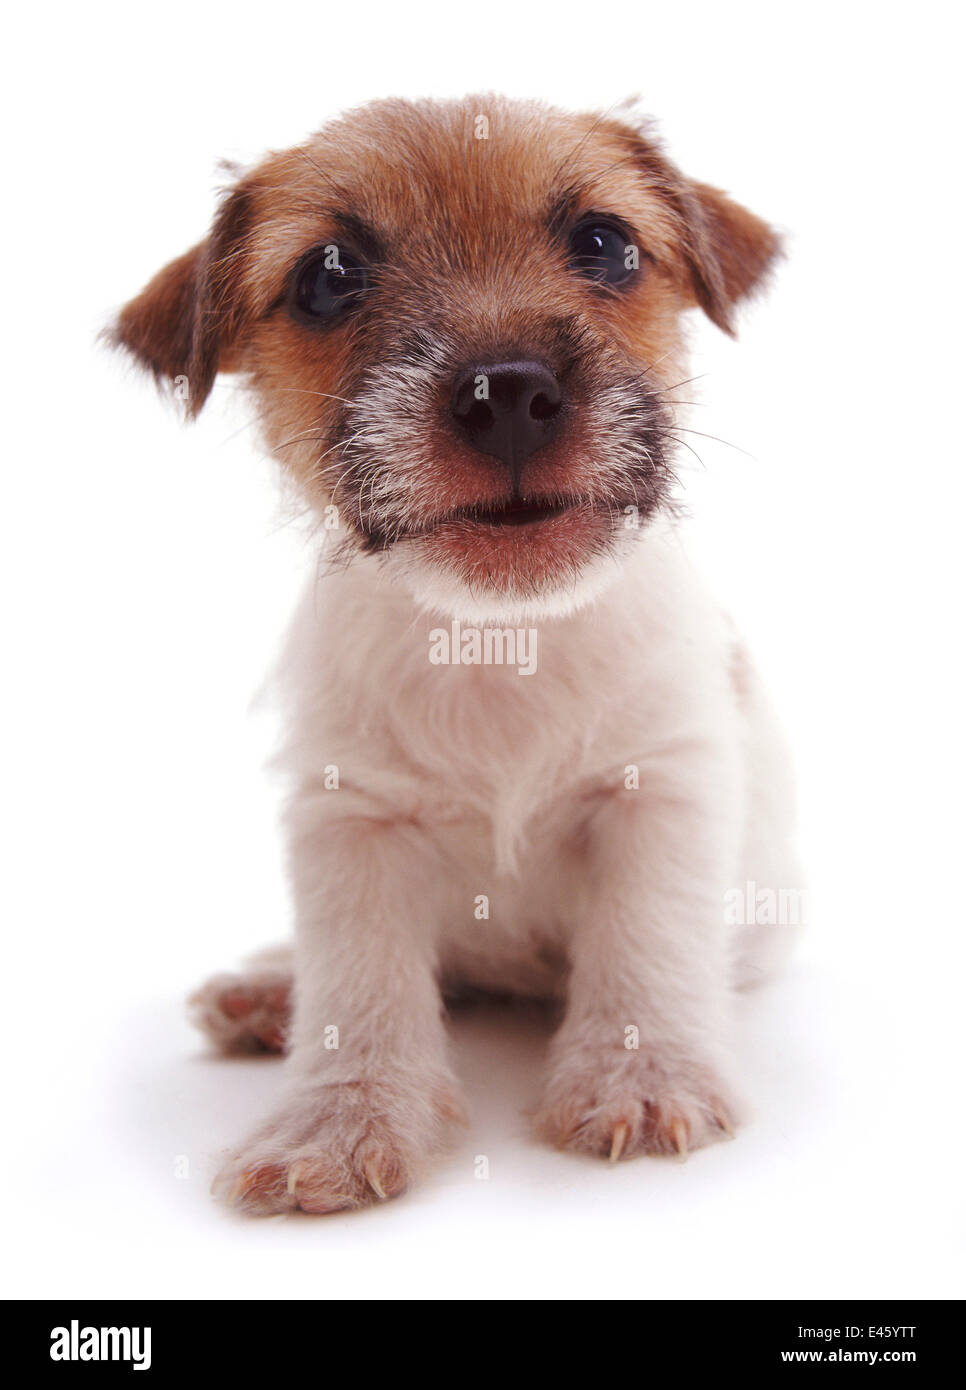 Rough coated Jack Russell Terrier puppy, black, tan and white, portrait Stock Photo